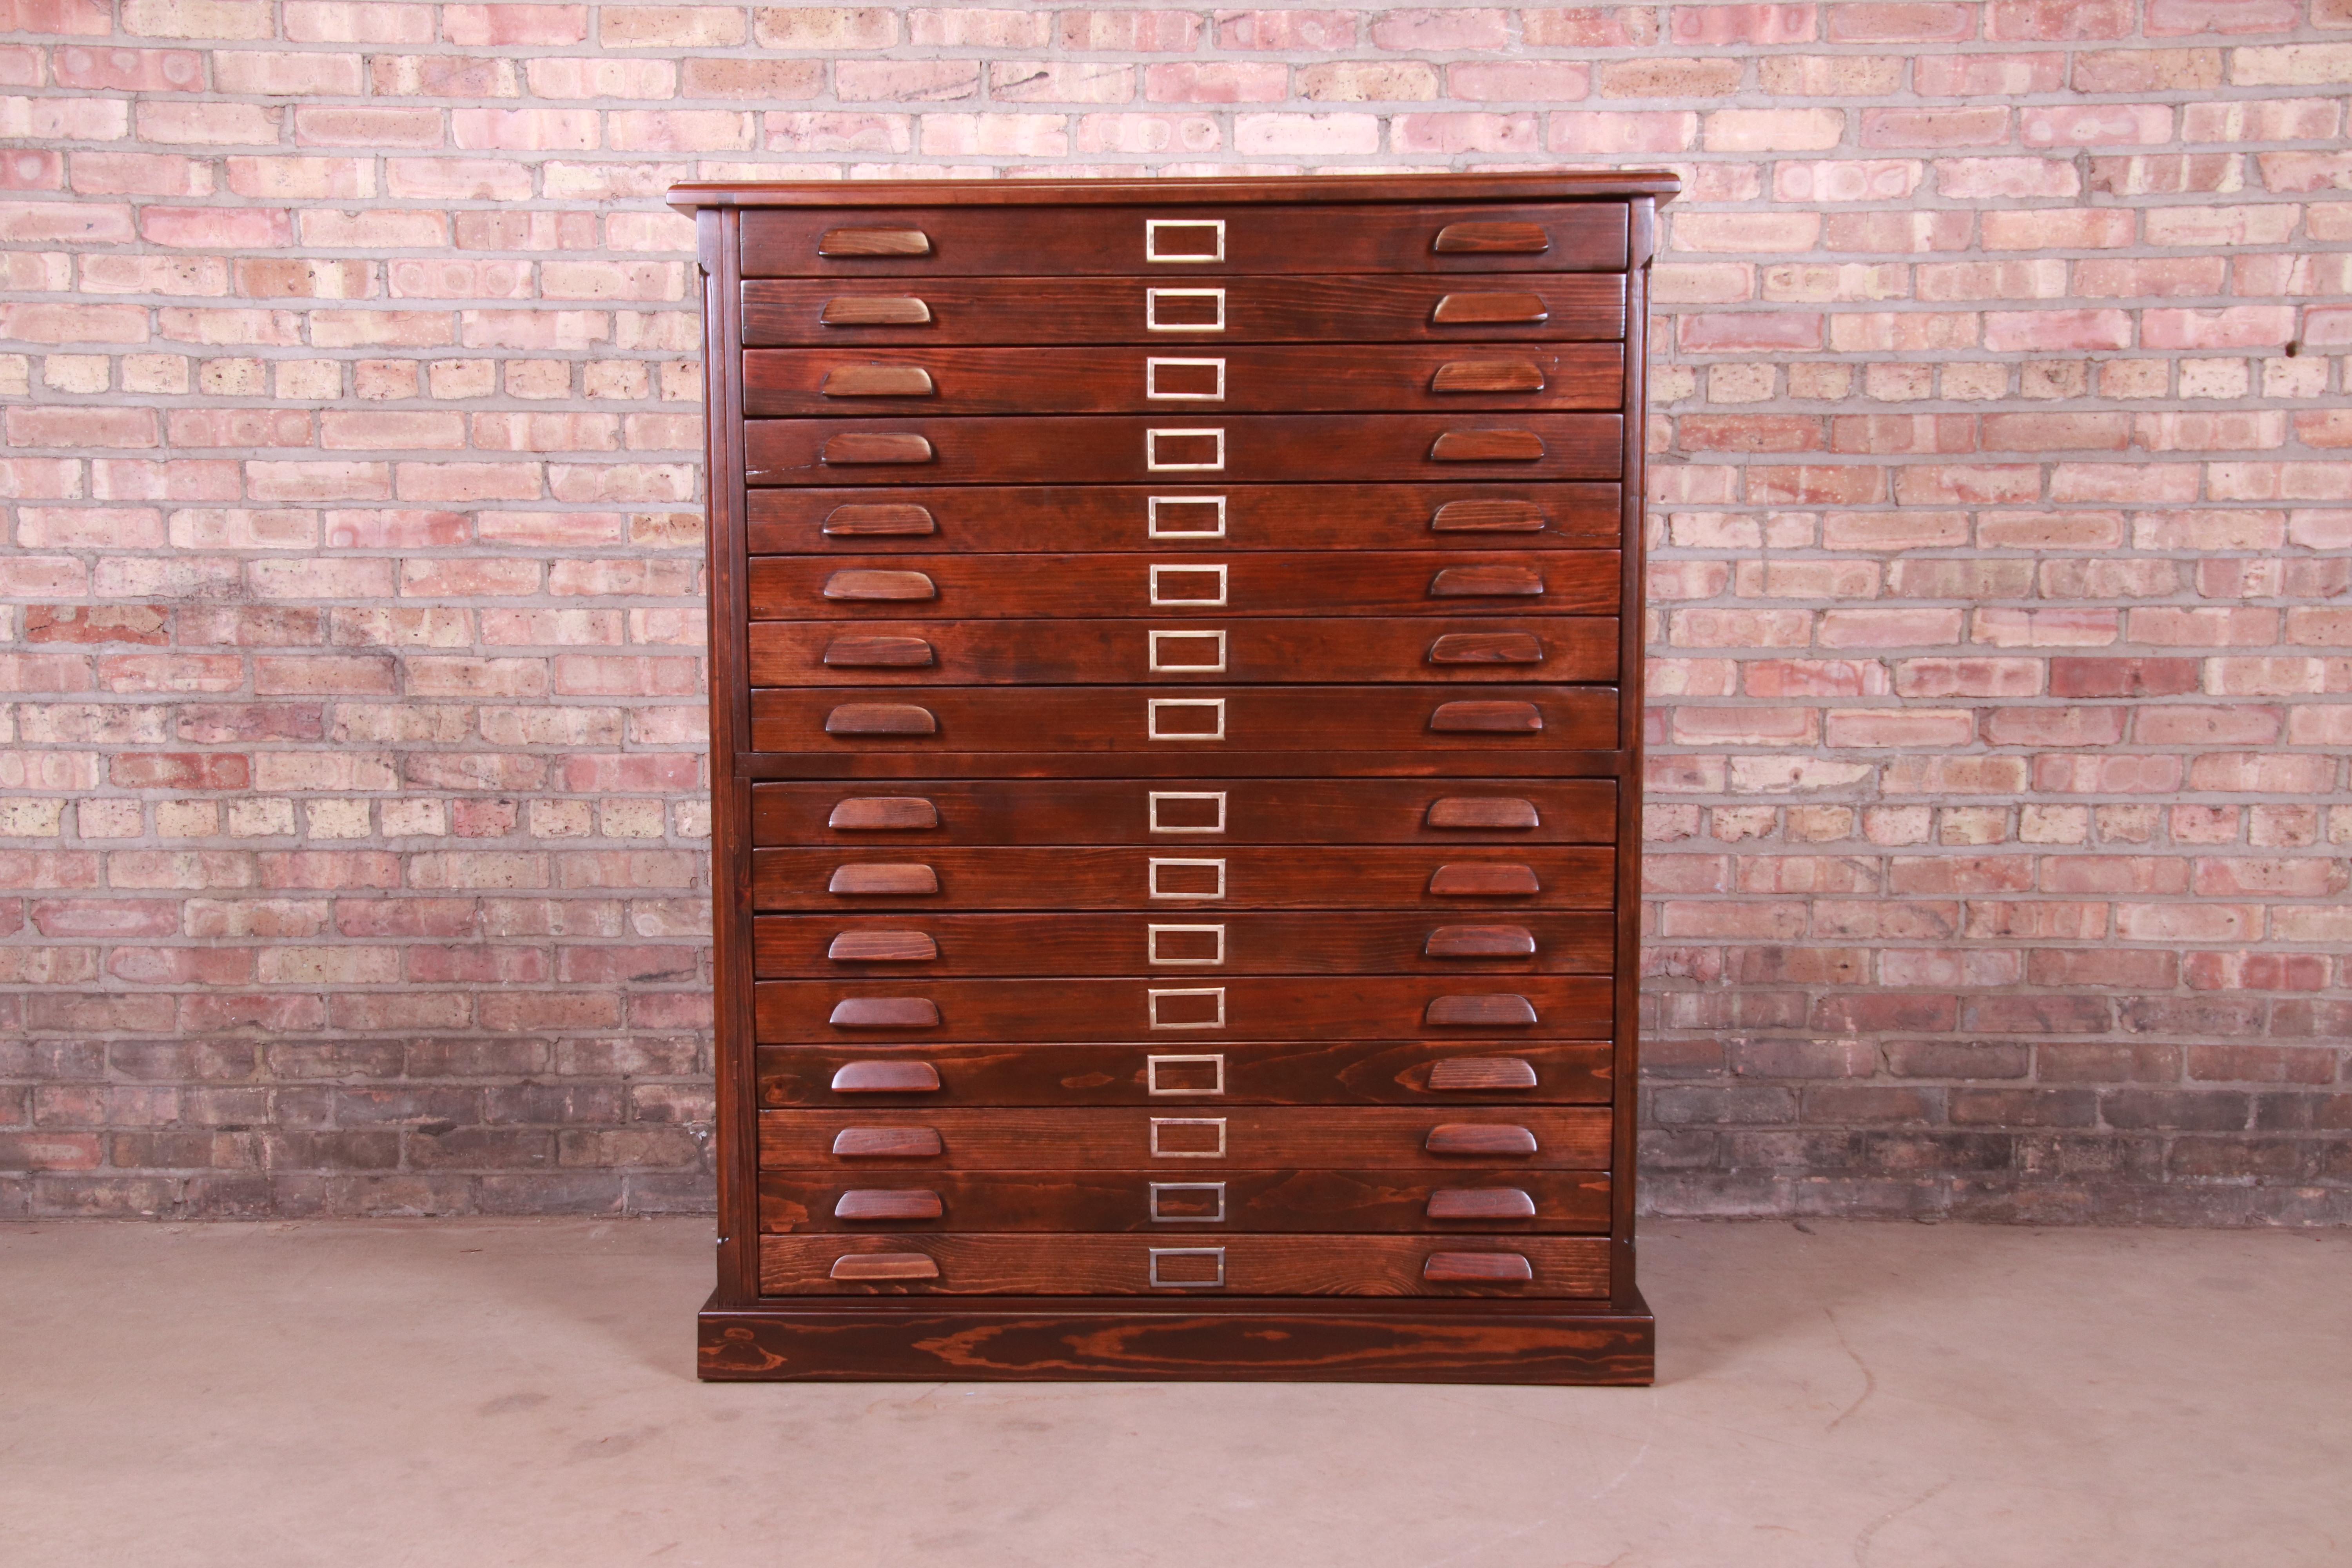 A rare and exceptional antique Arts & Crafts architect's blueprint or map 16-drawer flat file cabinet

USA, early 20th century

Solid pine, with original hardware.

Measures: 44.75